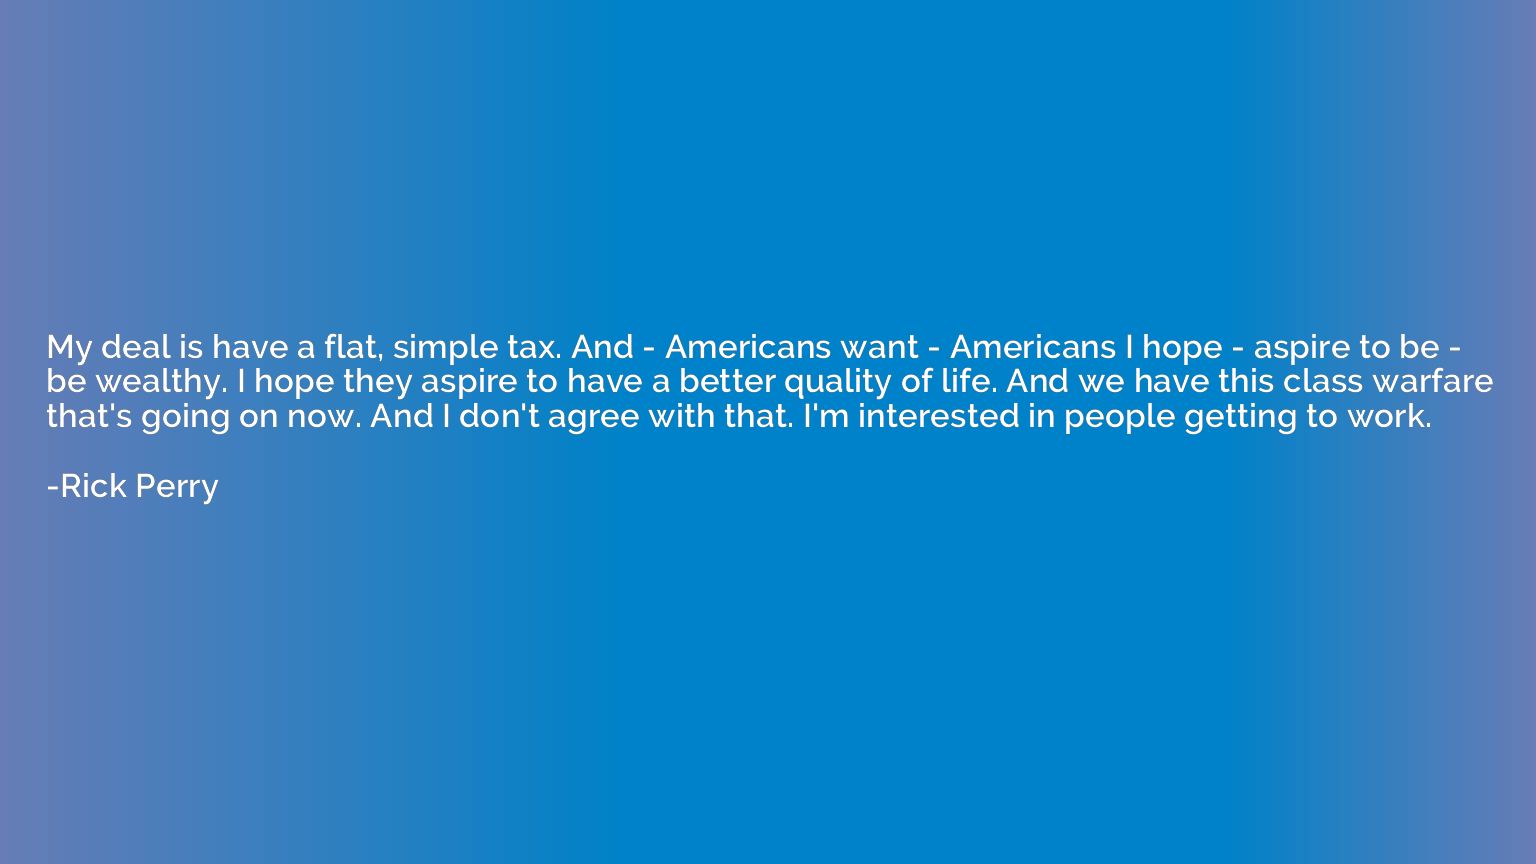 My deal is have a flat, simple tax. And - Americans want - A